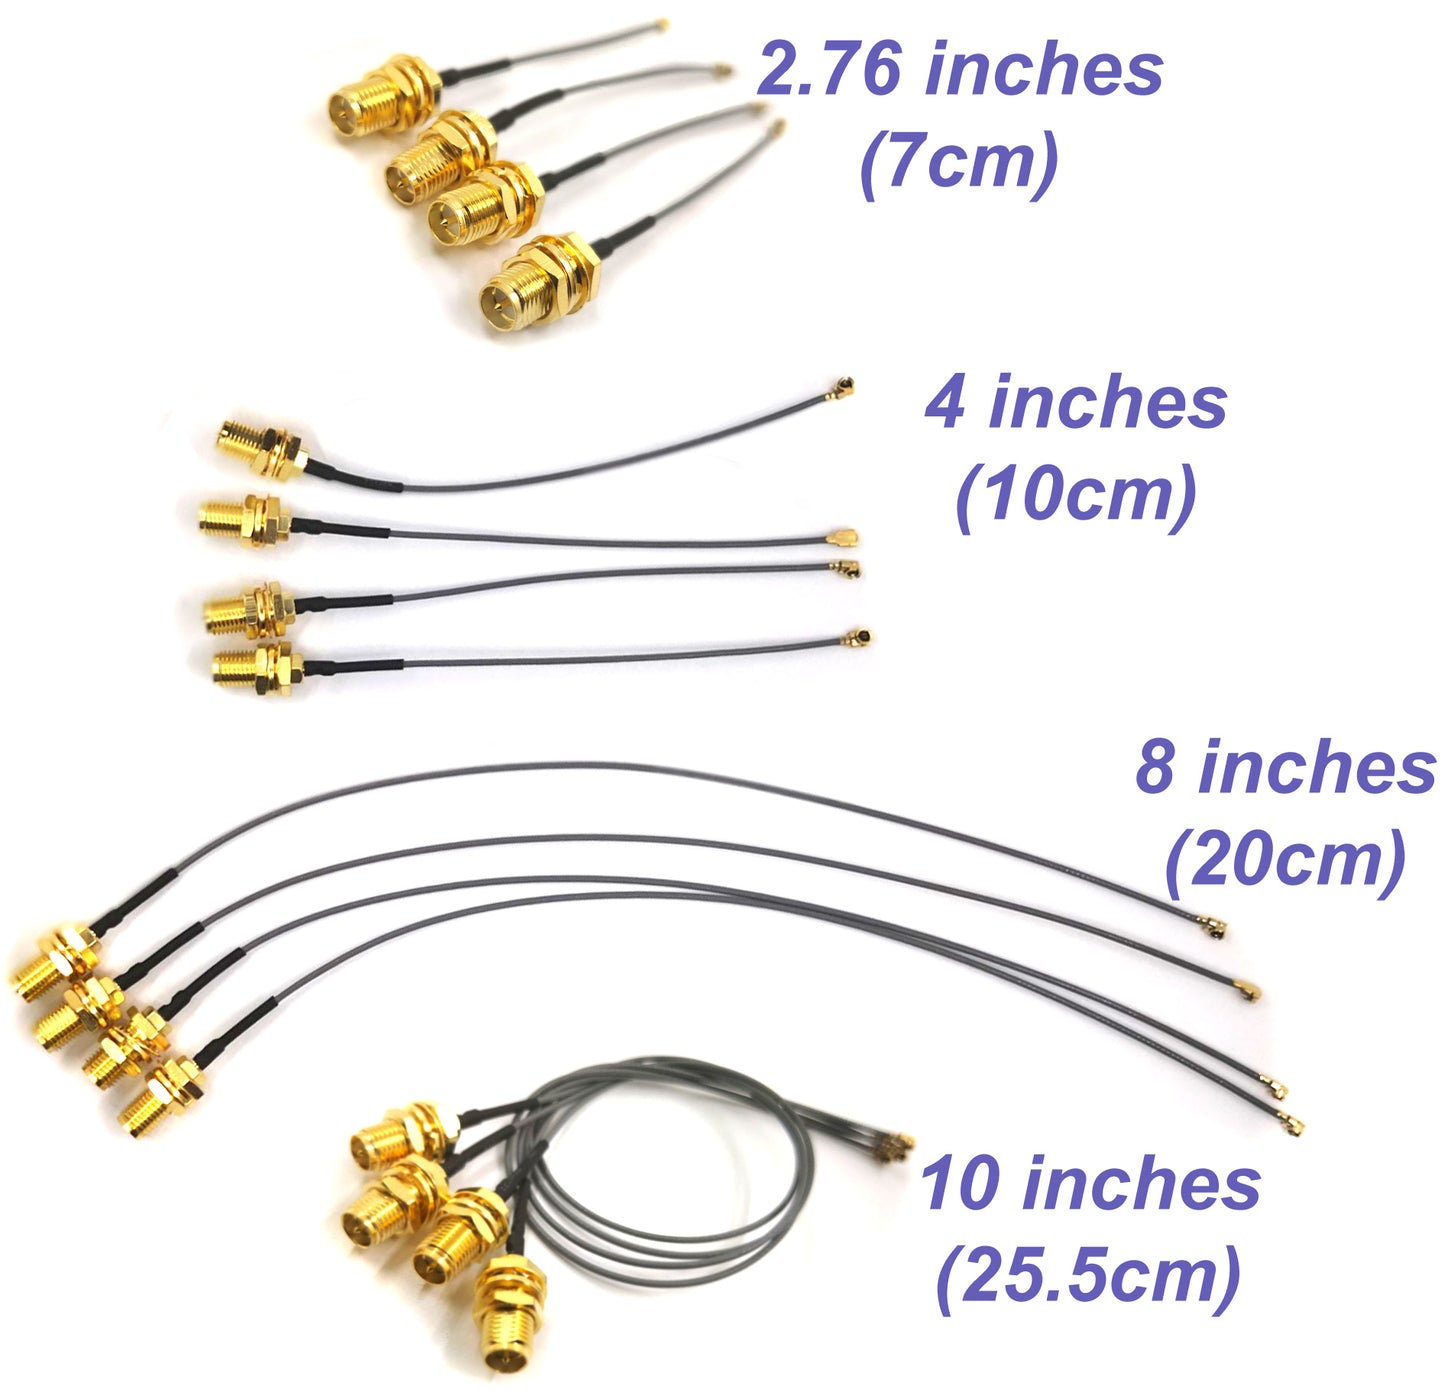 Pack of 4 RF U.FL(IPEX/IPX) Mini PCI to RP-SMA Female Pigtail Antenna Wi-Fi Low Loss Coaxial Cable 1.13mm